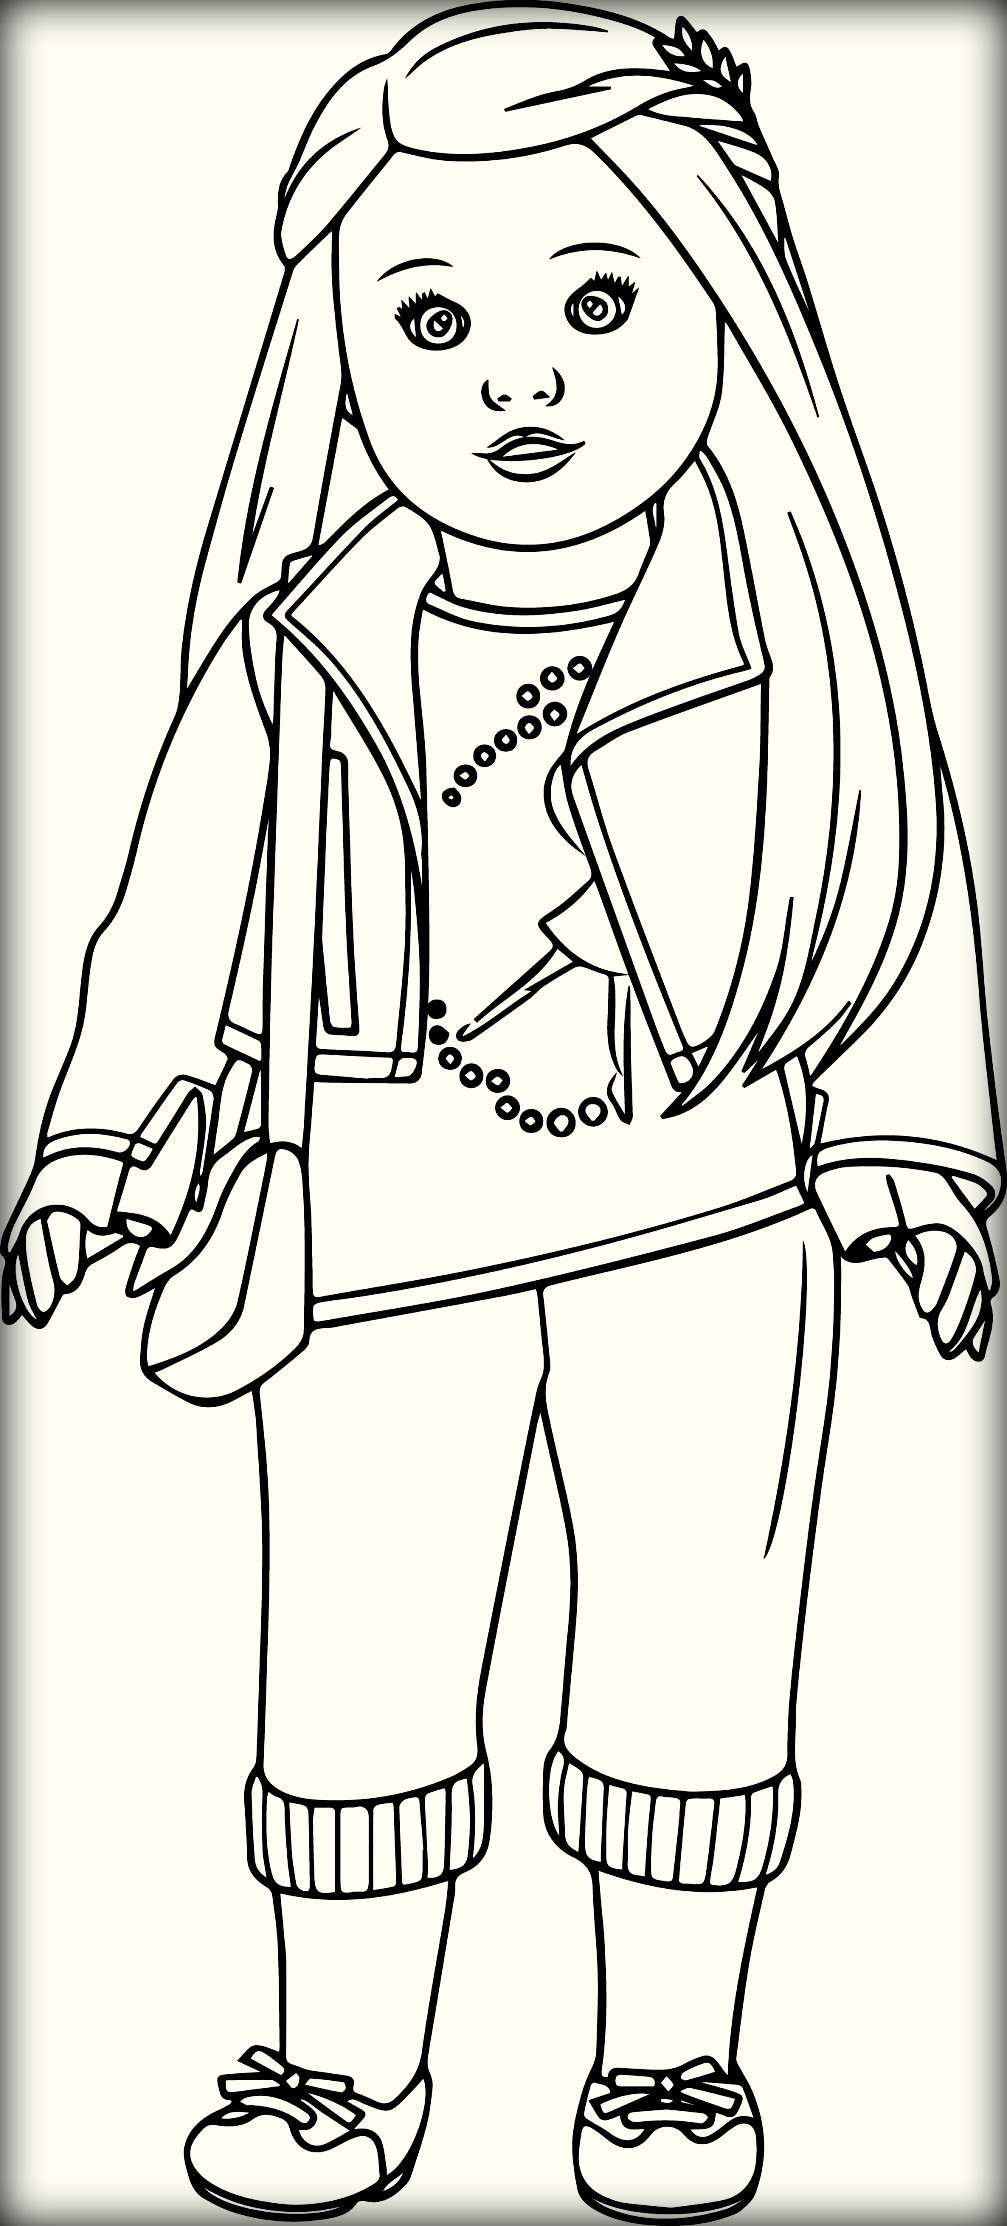 Coloring Pages American Girl
 American Girl Doll Coloring Pages coloringsuite